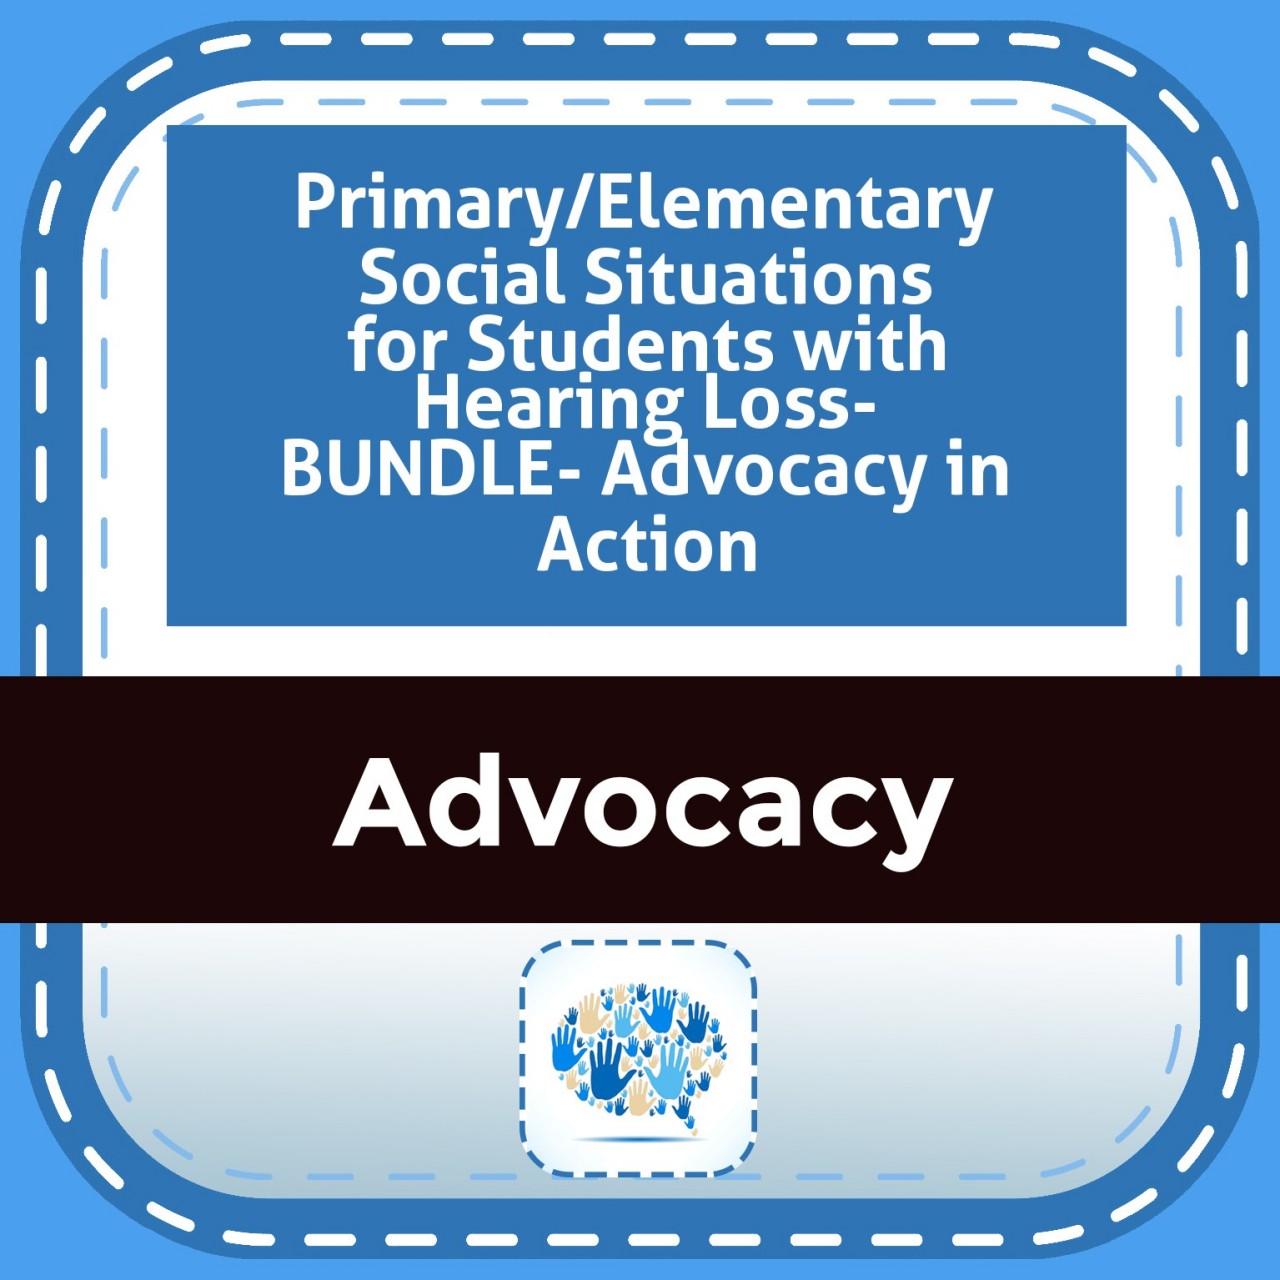 Primary/Elementary Social Situations for Students with Hearing Loss- BUNDLE- Advocacy in Action